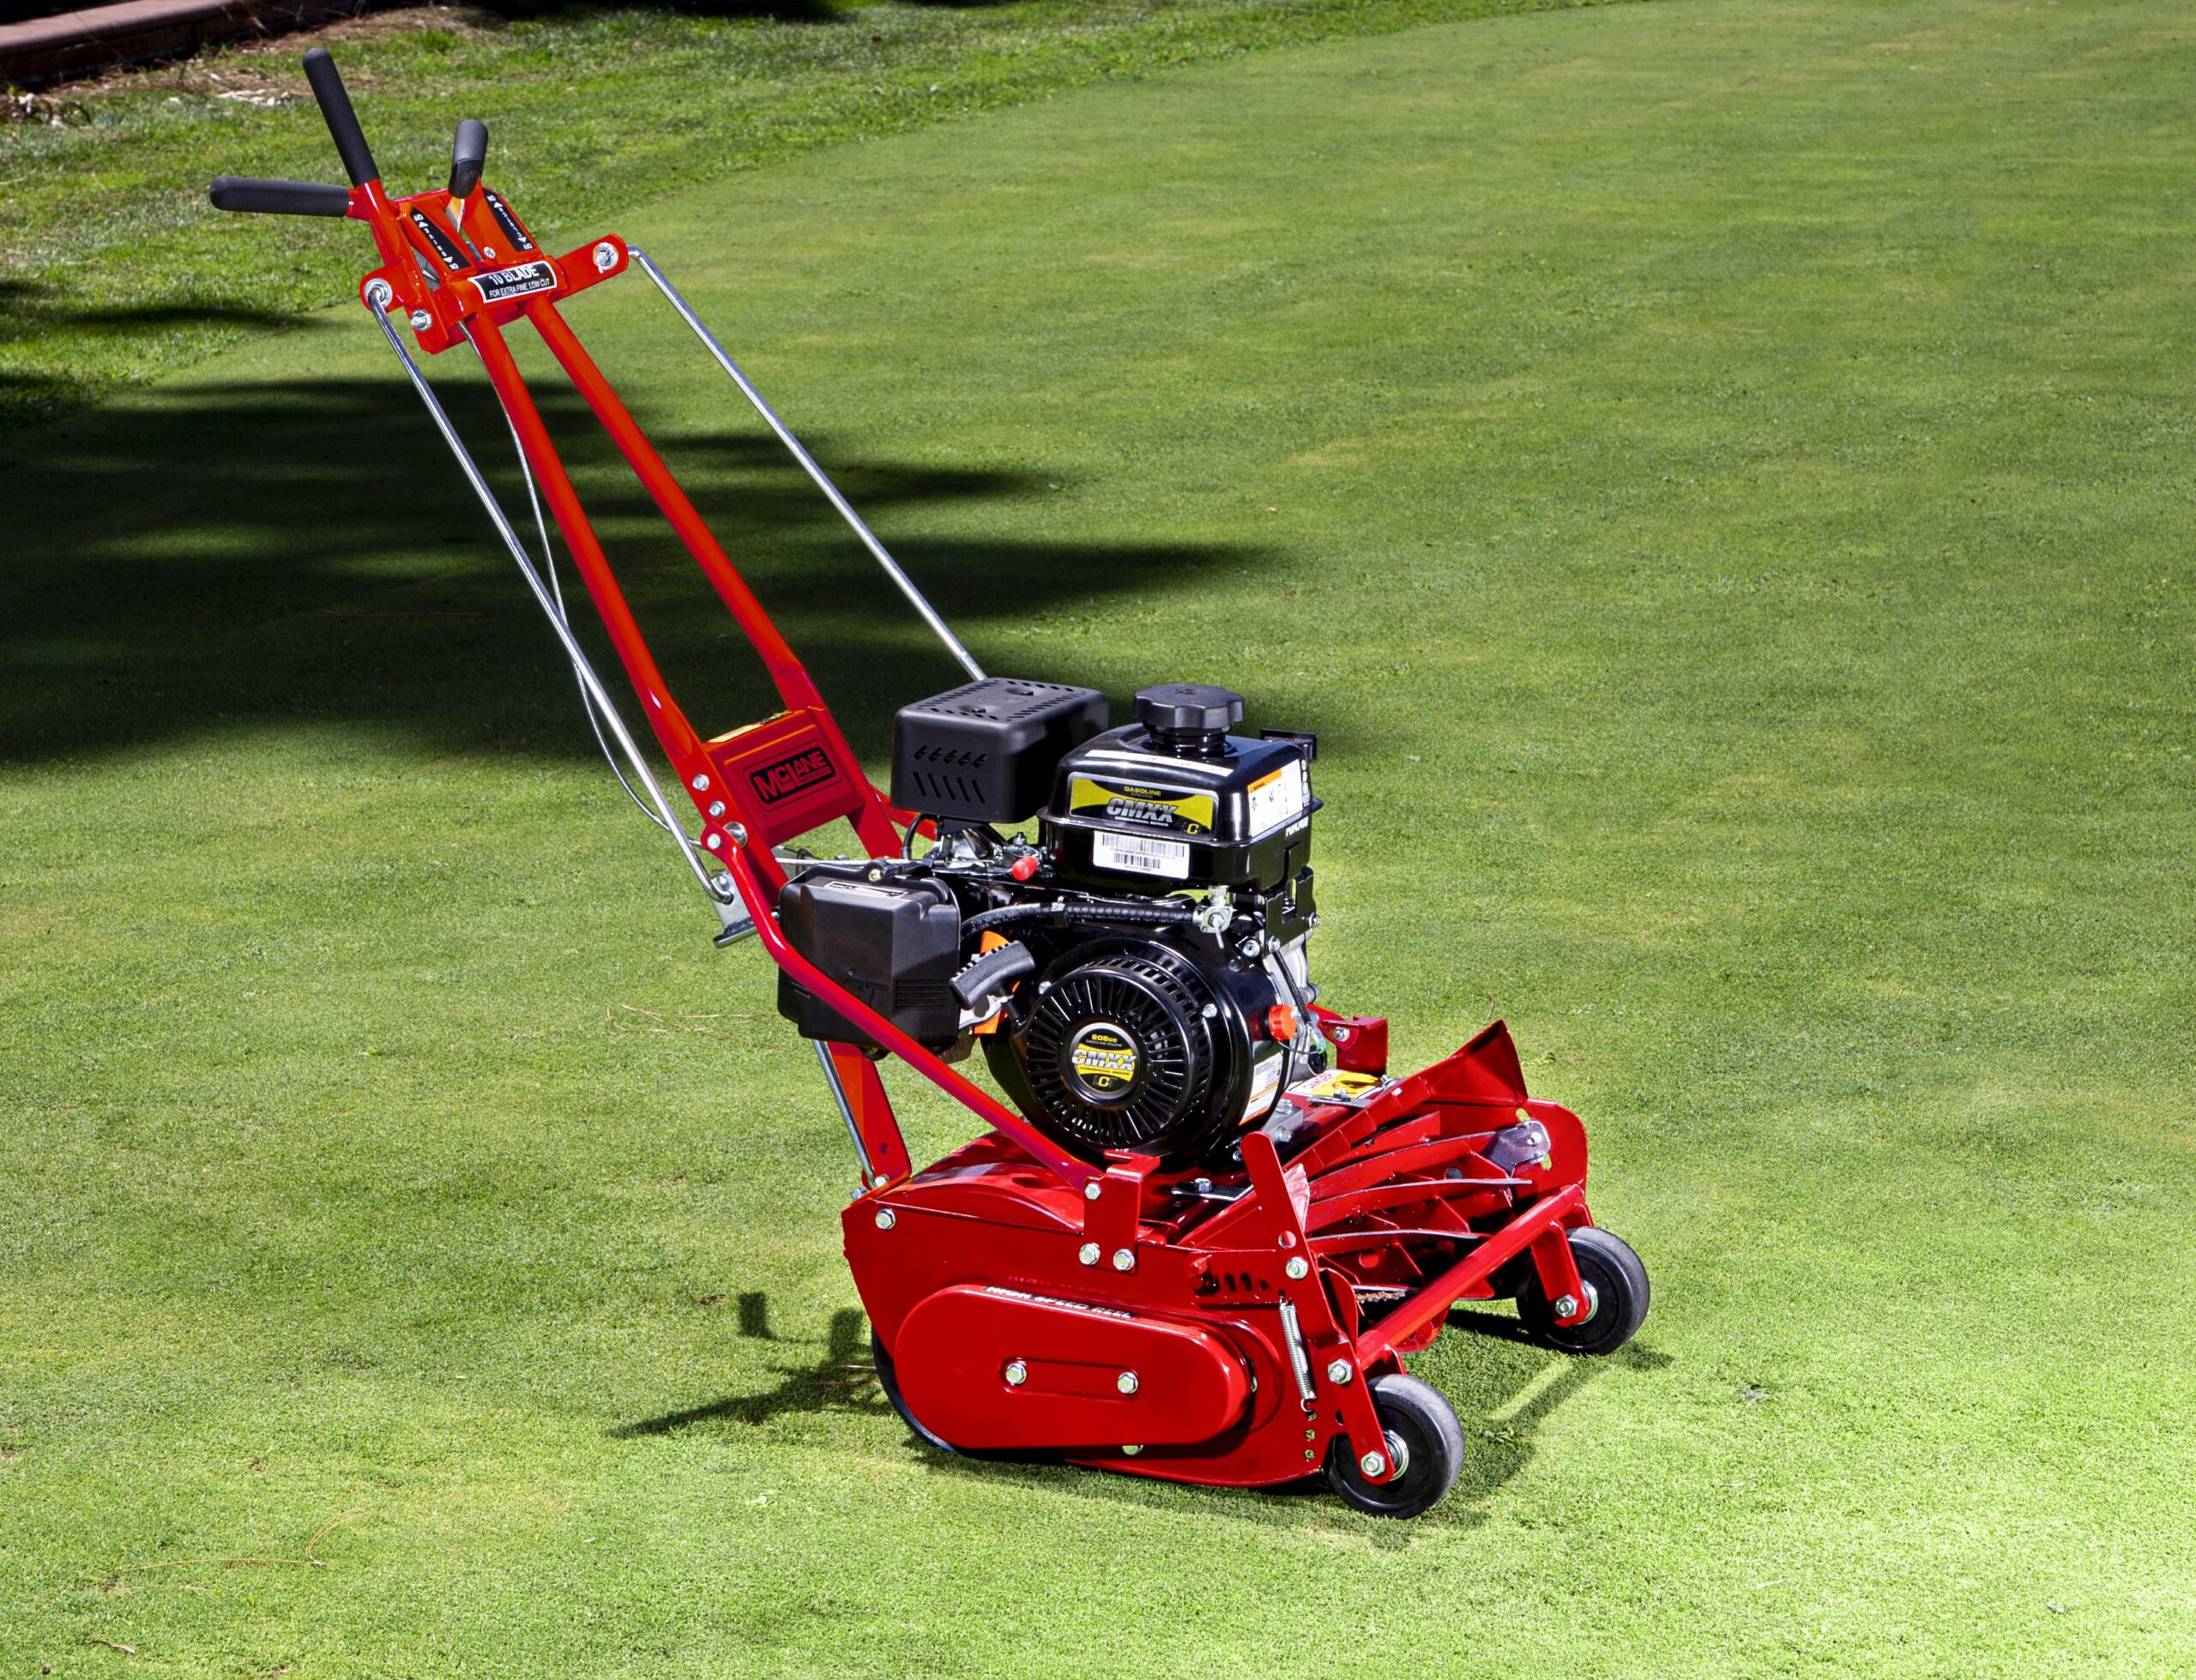 25″ Reel Mower Red Version (SPRING SPECIAL, LOWEST PRICE EVER